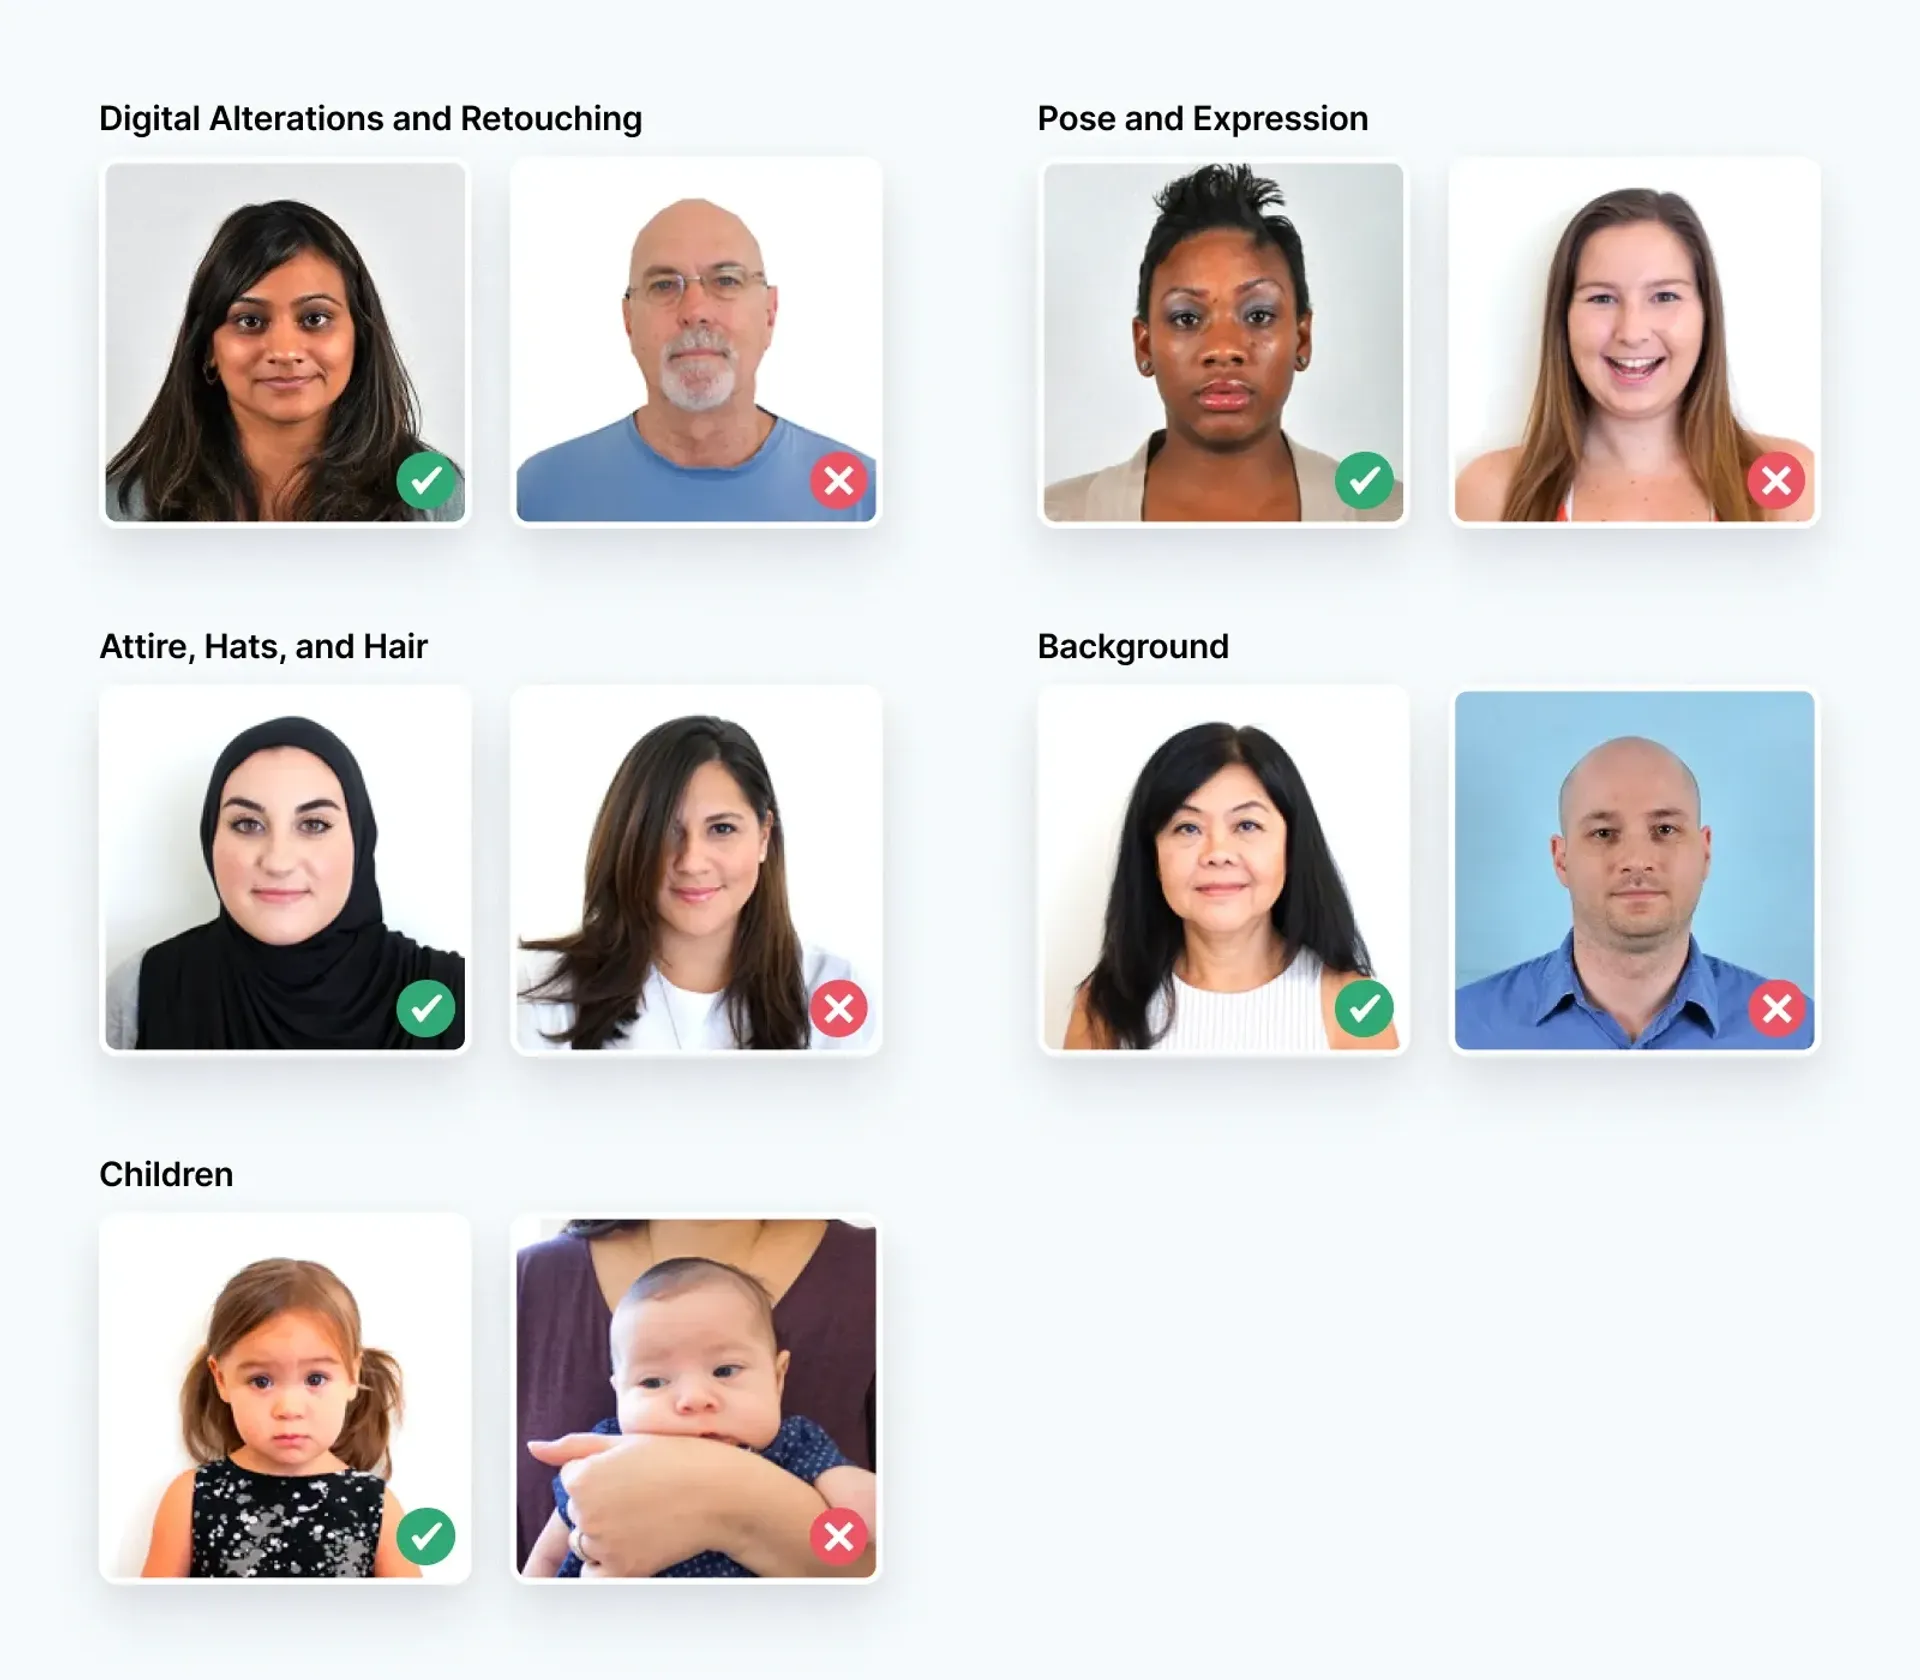 Real-life photo examples of compliant and non-compliant 2x2 passport photos.